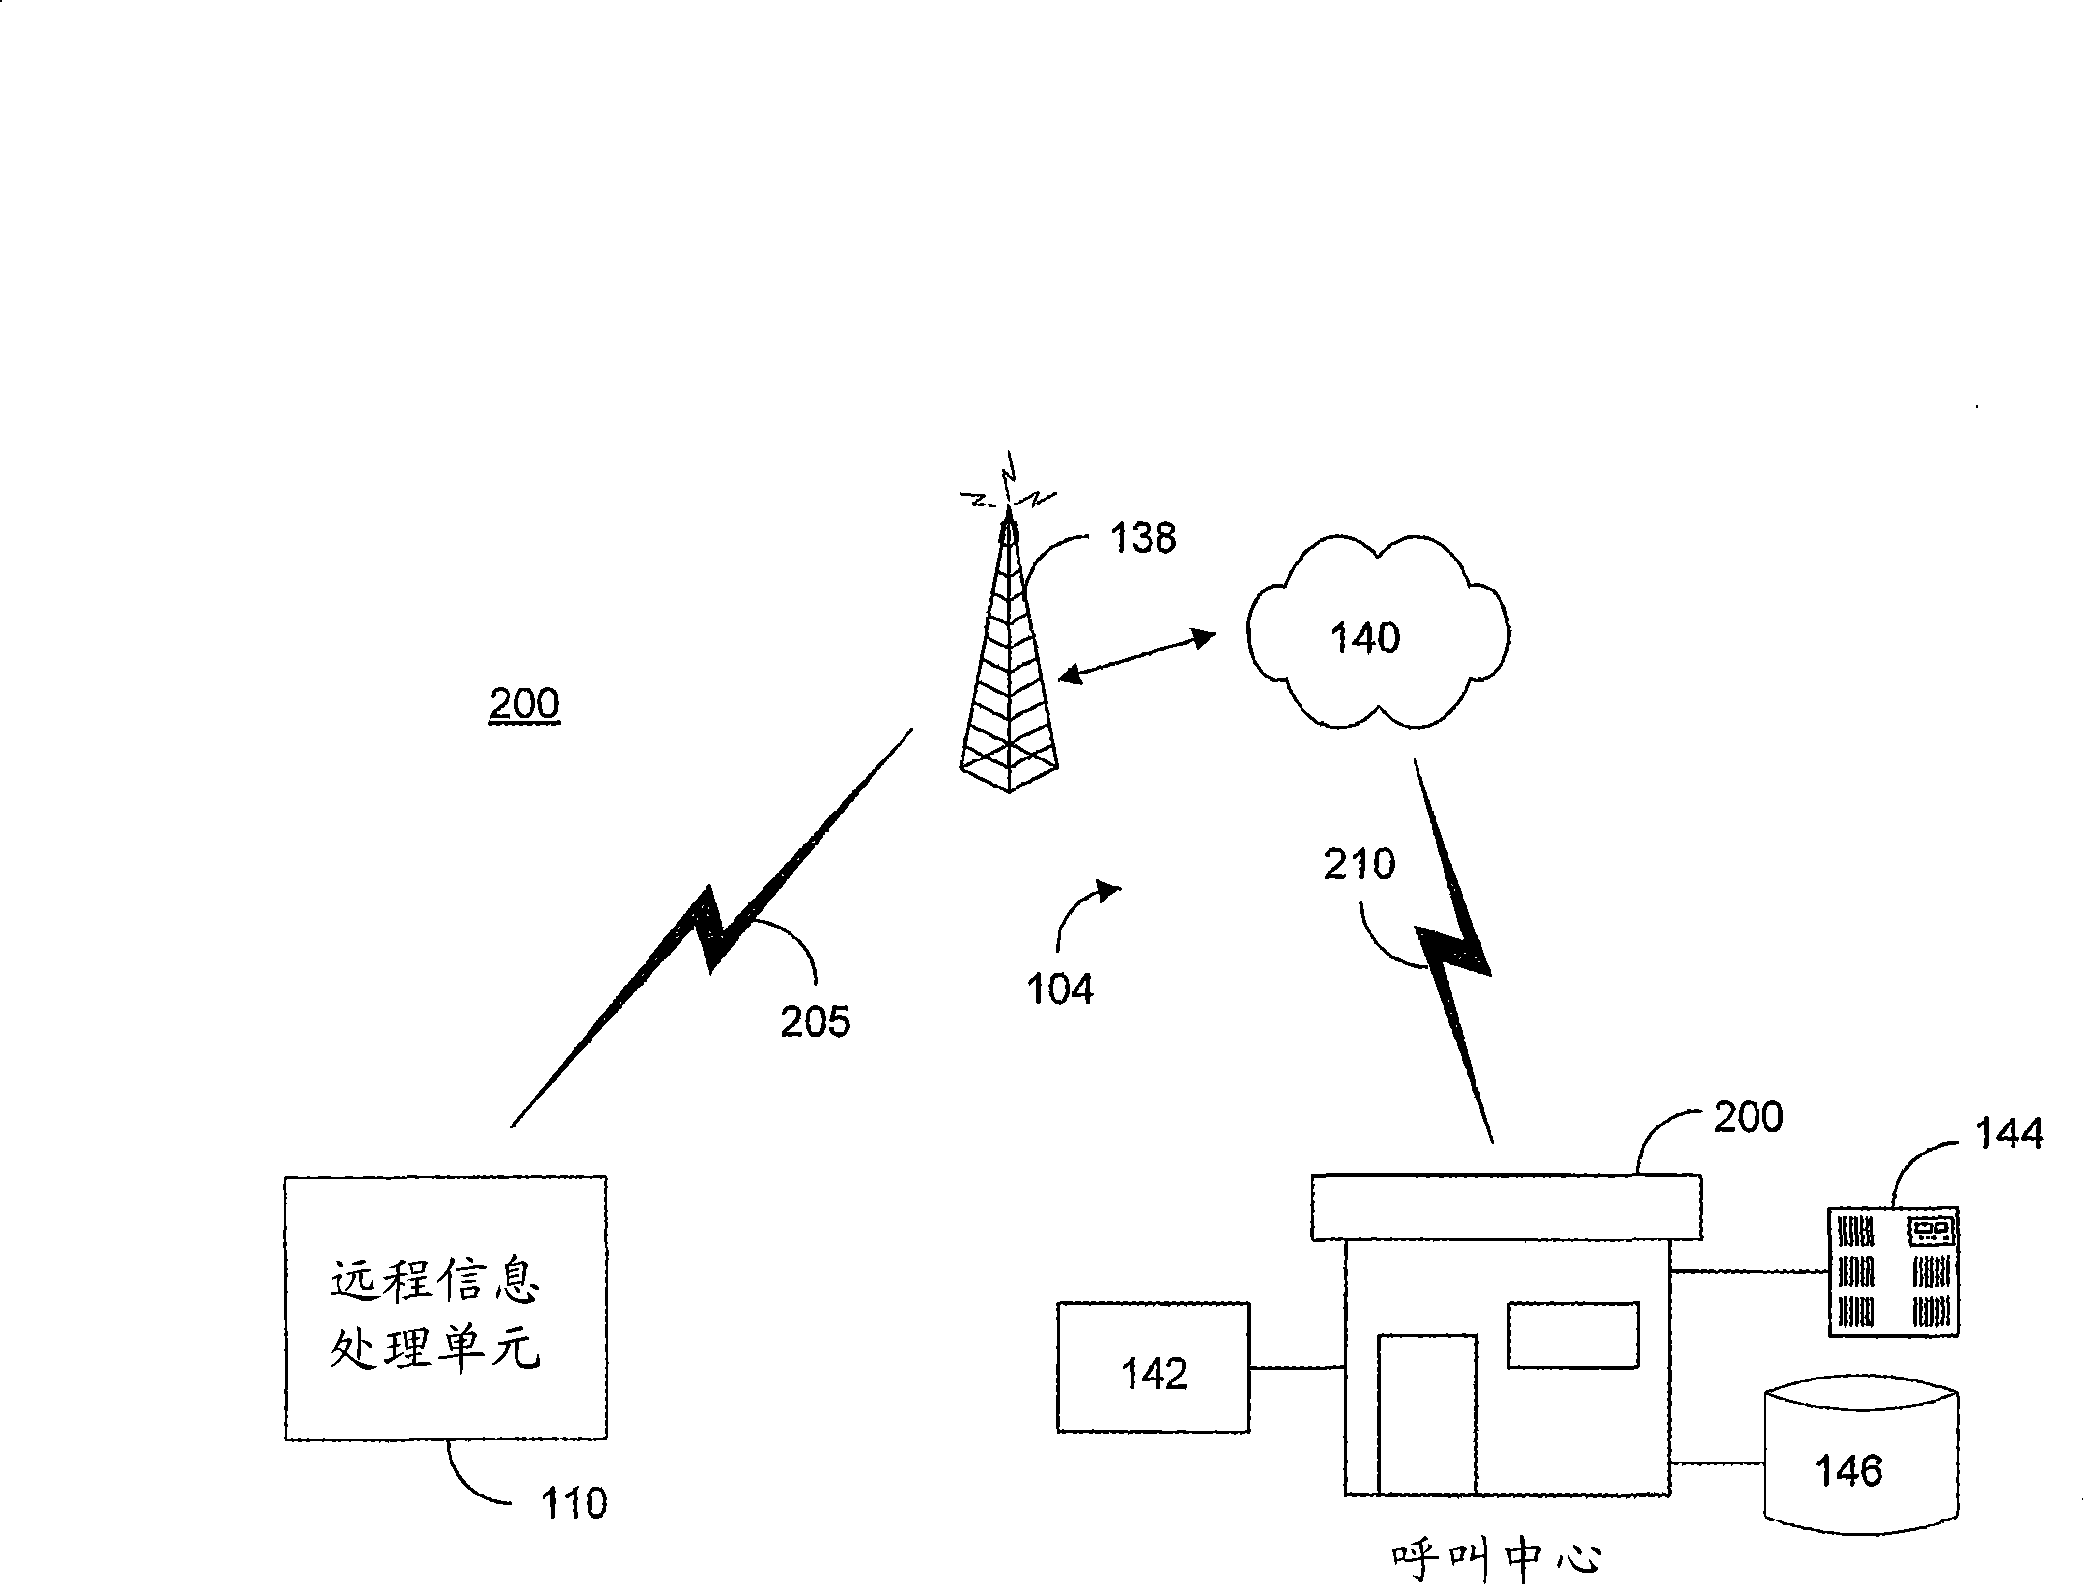 Method and system for configuring a telematics device using two-way data messaging